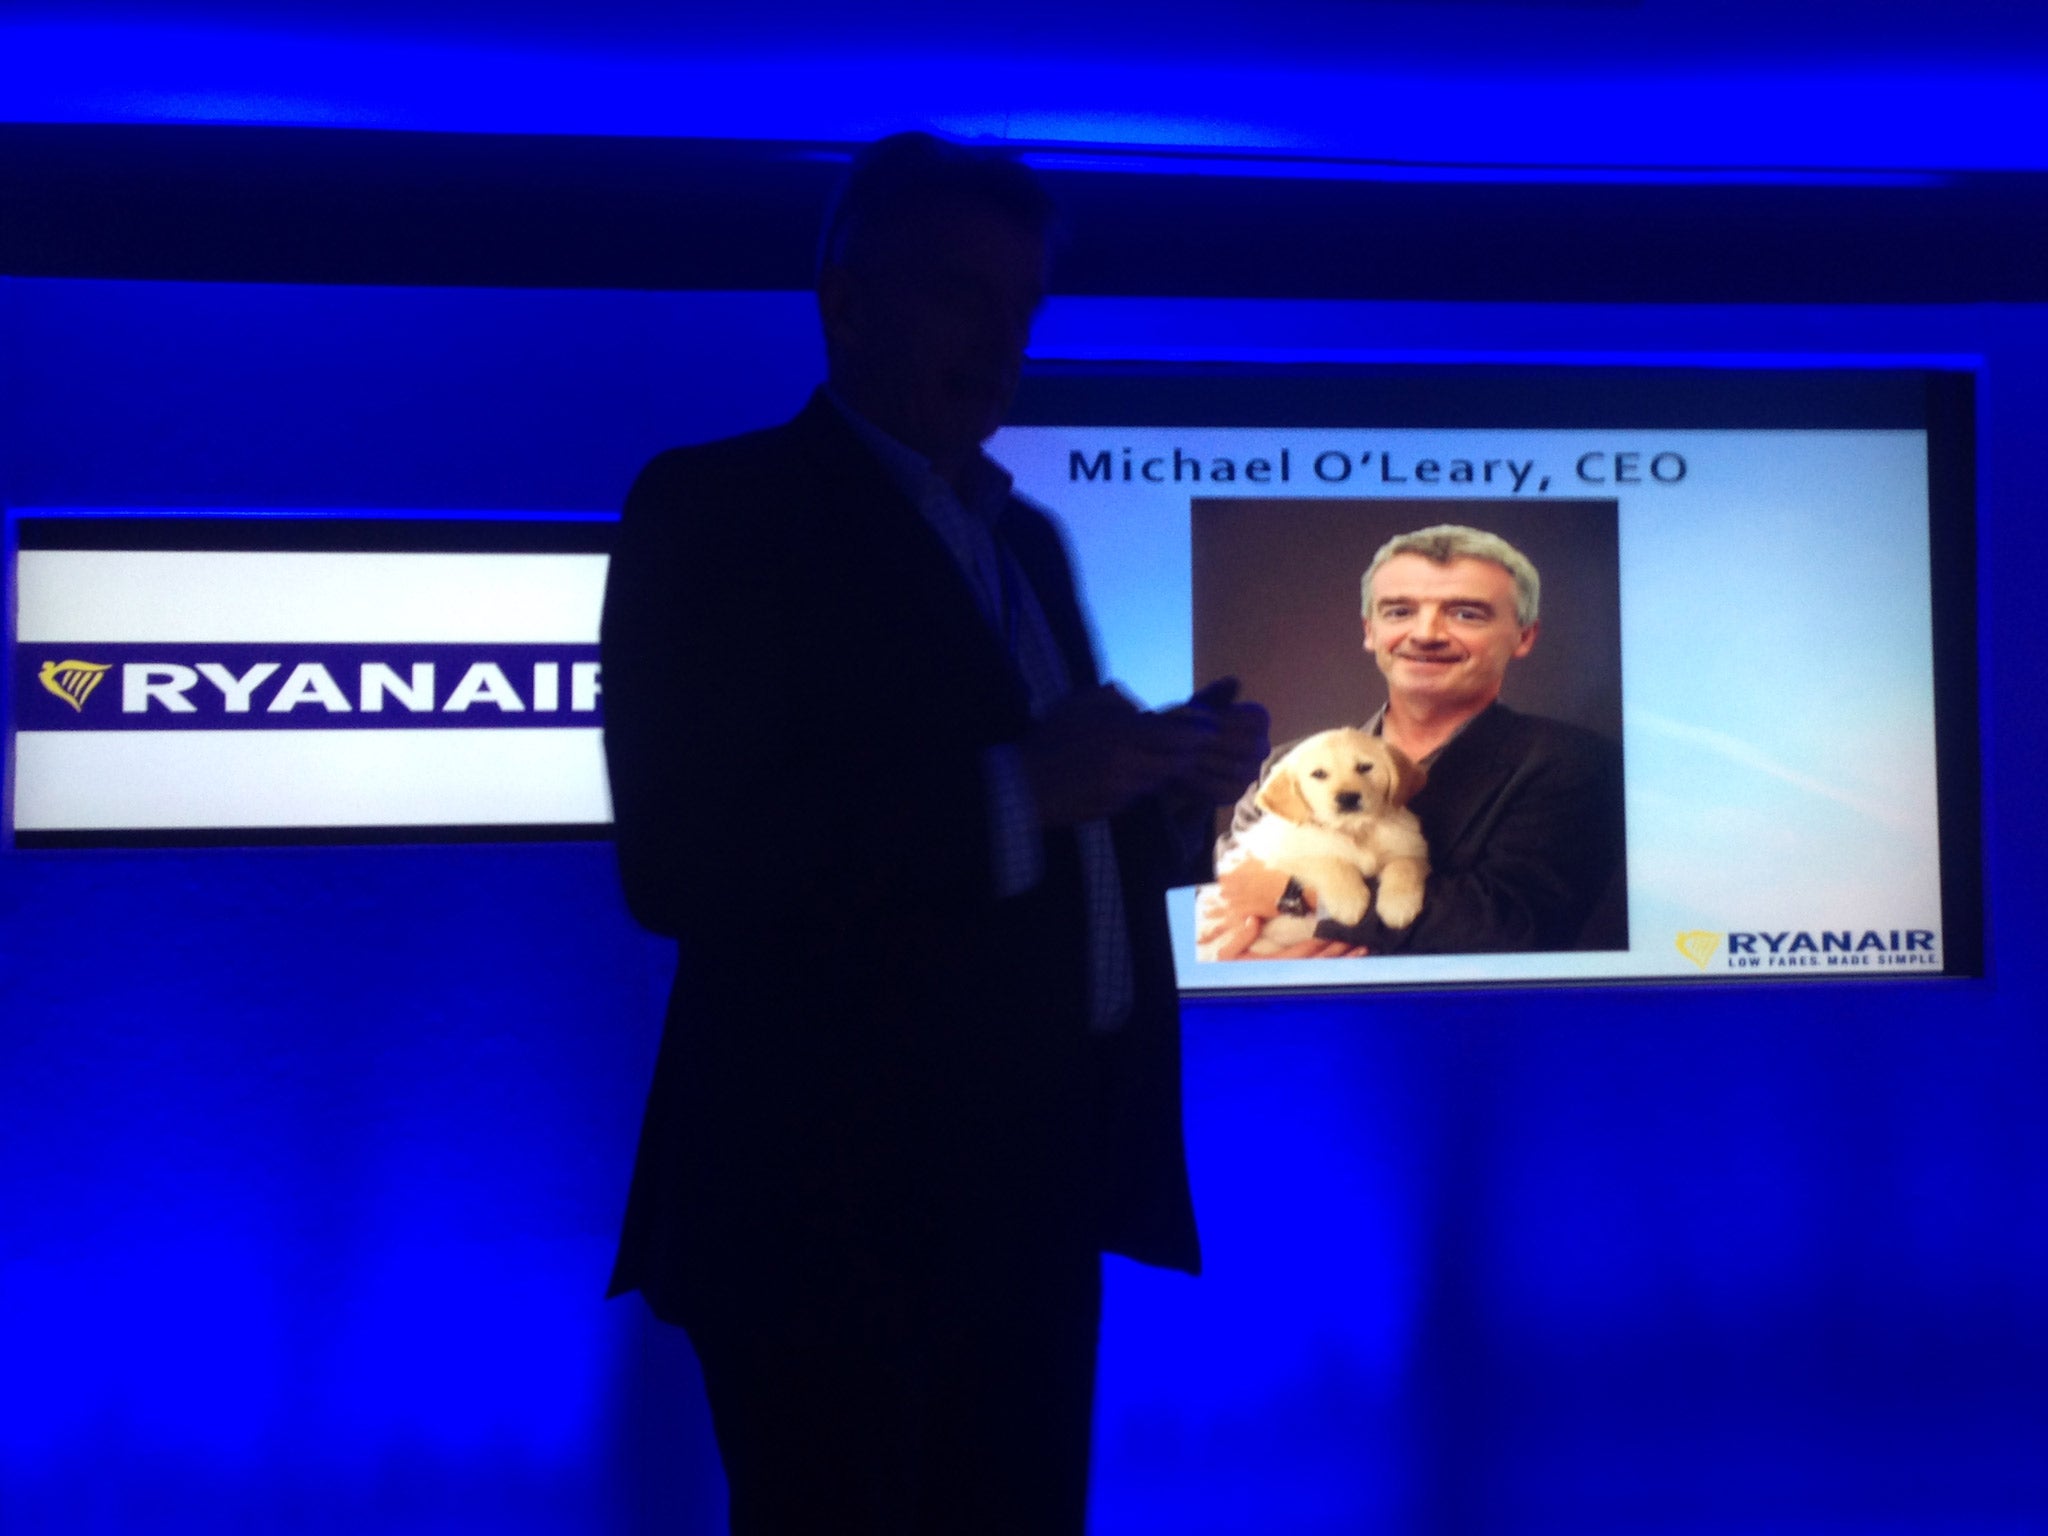 O'leary presents a new, cuddlier image for Ryanair